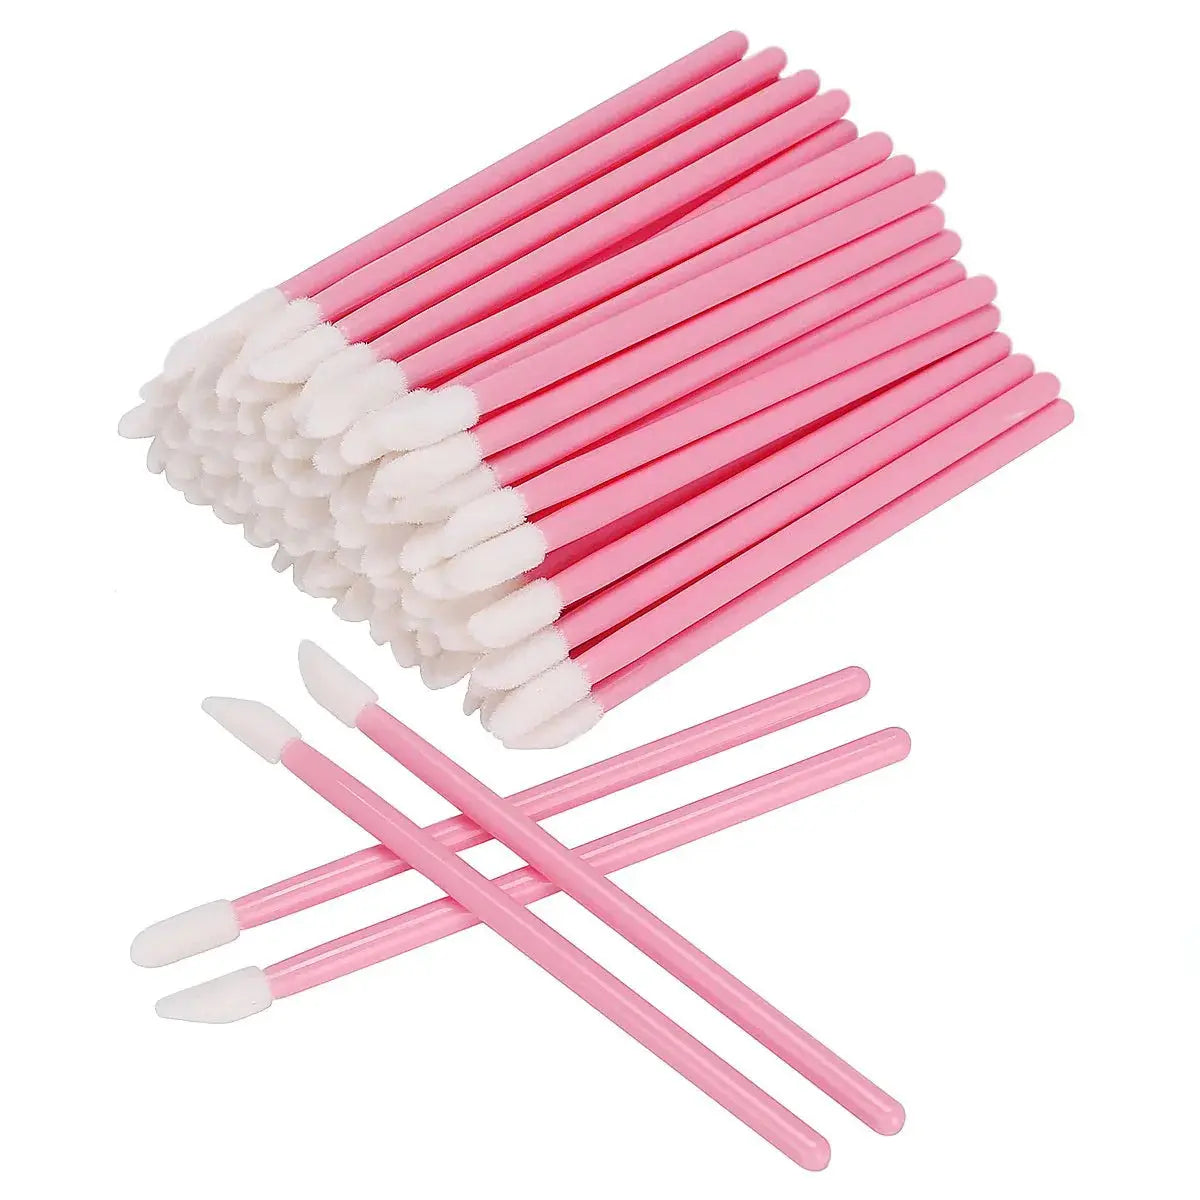 Colorful Lint Free Applicators Brush 50 Pieces/Pack Redberry